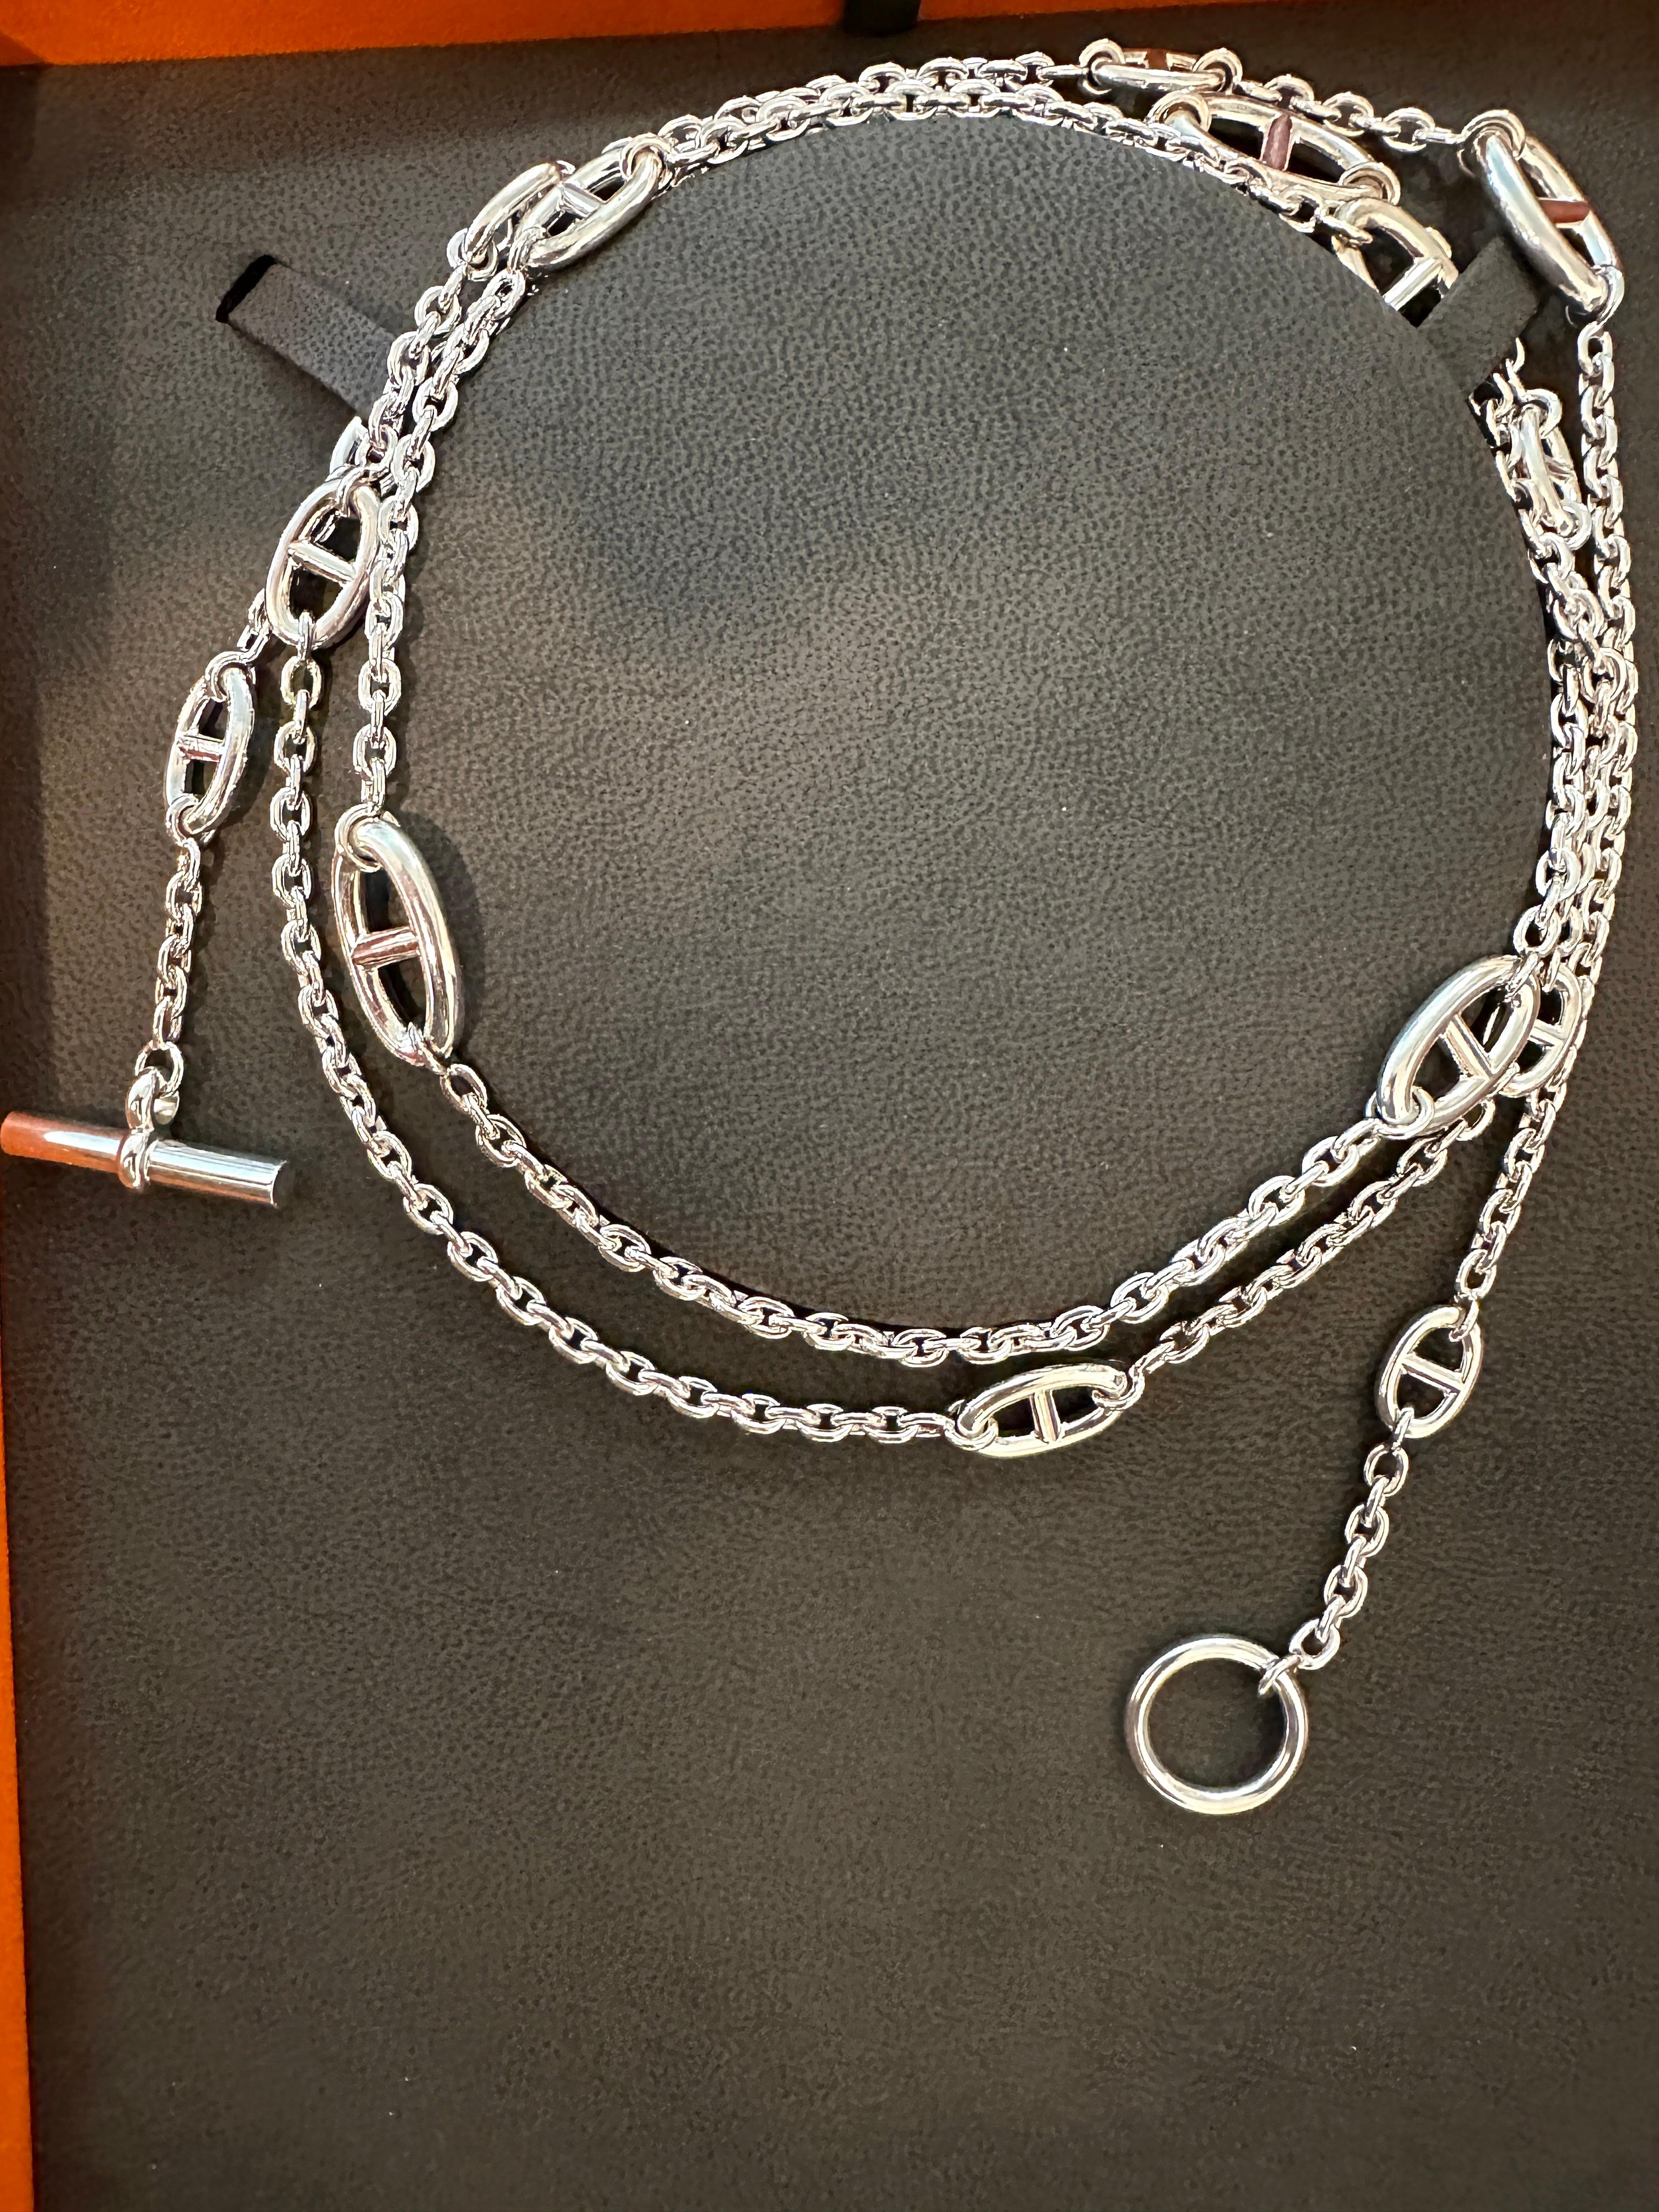 Hermes long necklace in sterling silver
Called the Farandole 120
Sterling Silver
Length is  approx 46